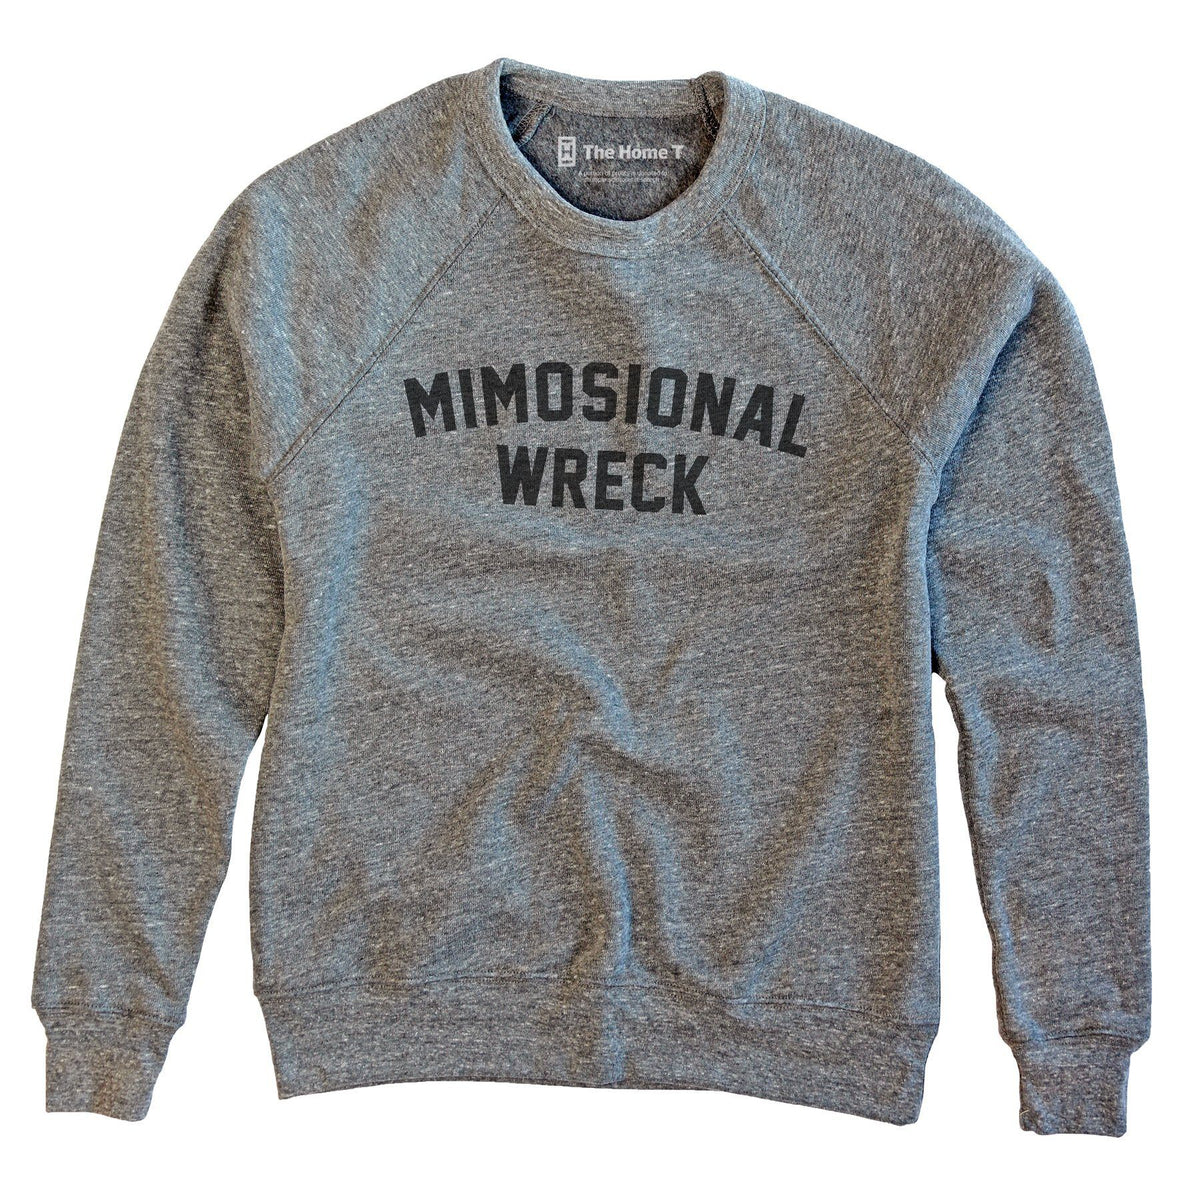 Mimosional Wreck Lifestyle The Home T XS Sweatshirt